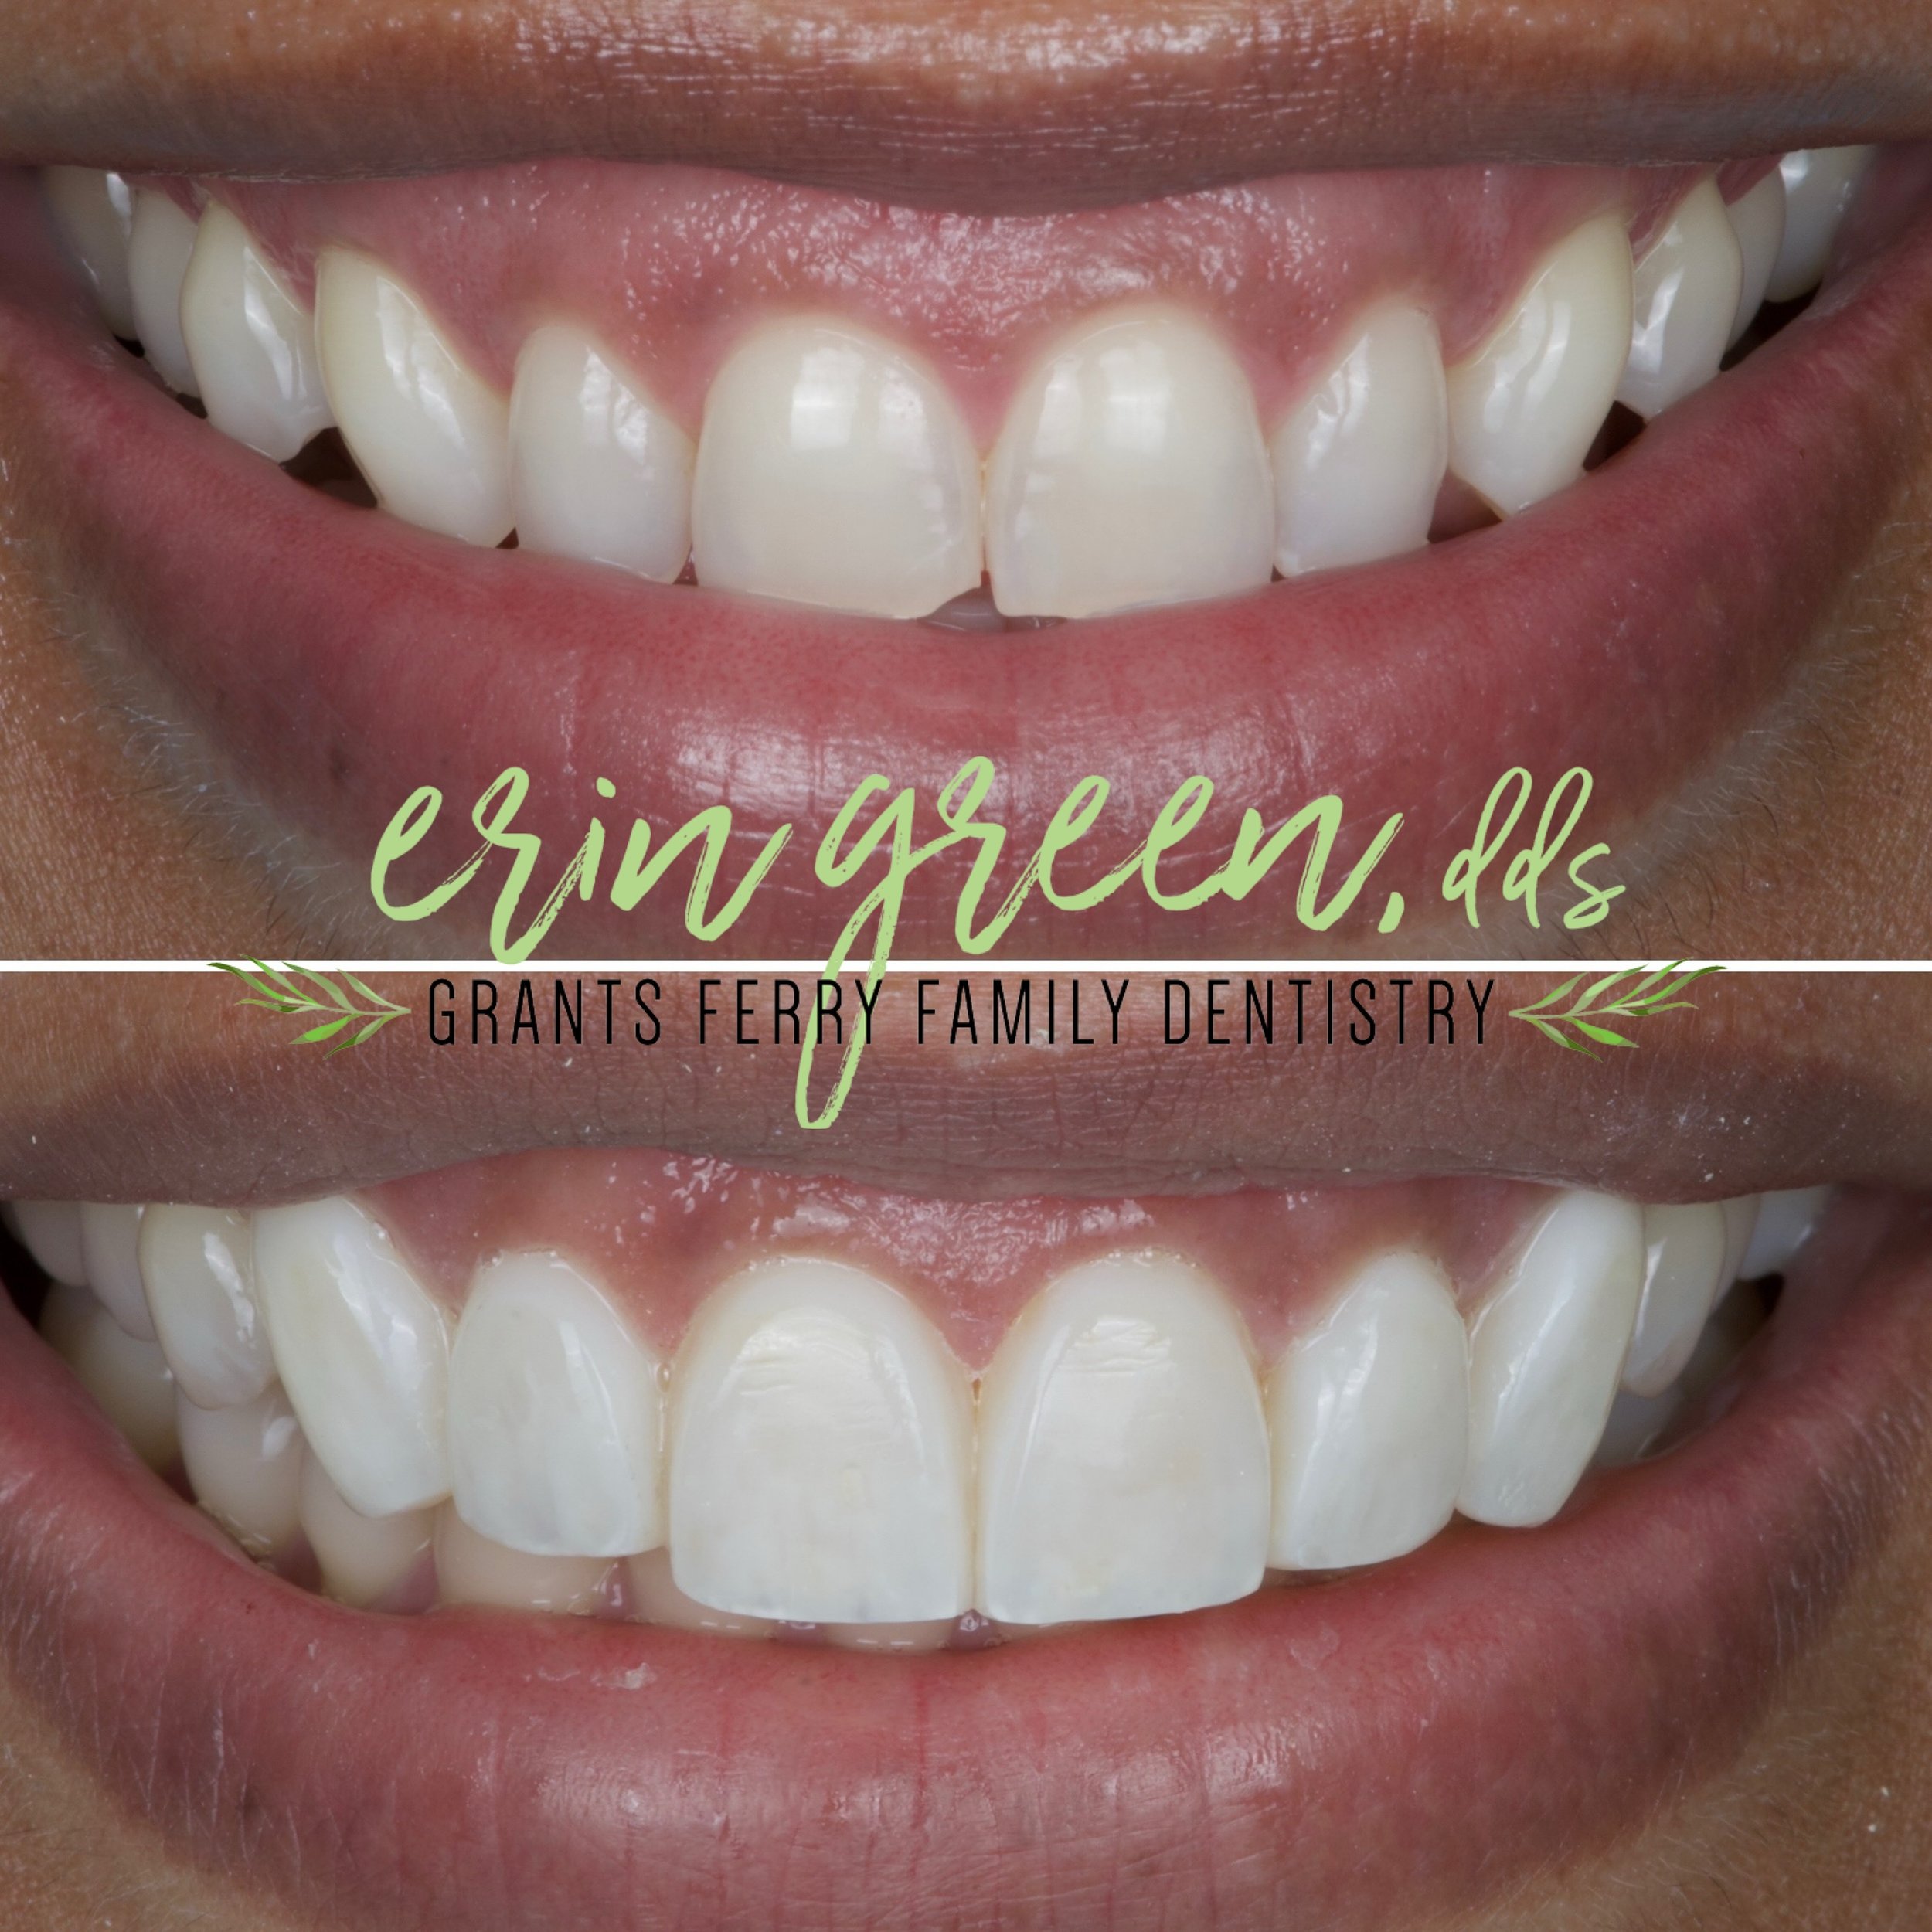 ✨ Transform your smile with a noninvasive smile enhancement! 😁 Say goodbye to gummy smiles and hello to a confident grin with a gum lift and composite veneers. No drilling of your natural teeth!🌟 Boost your confidence and dazzle with every smile! C